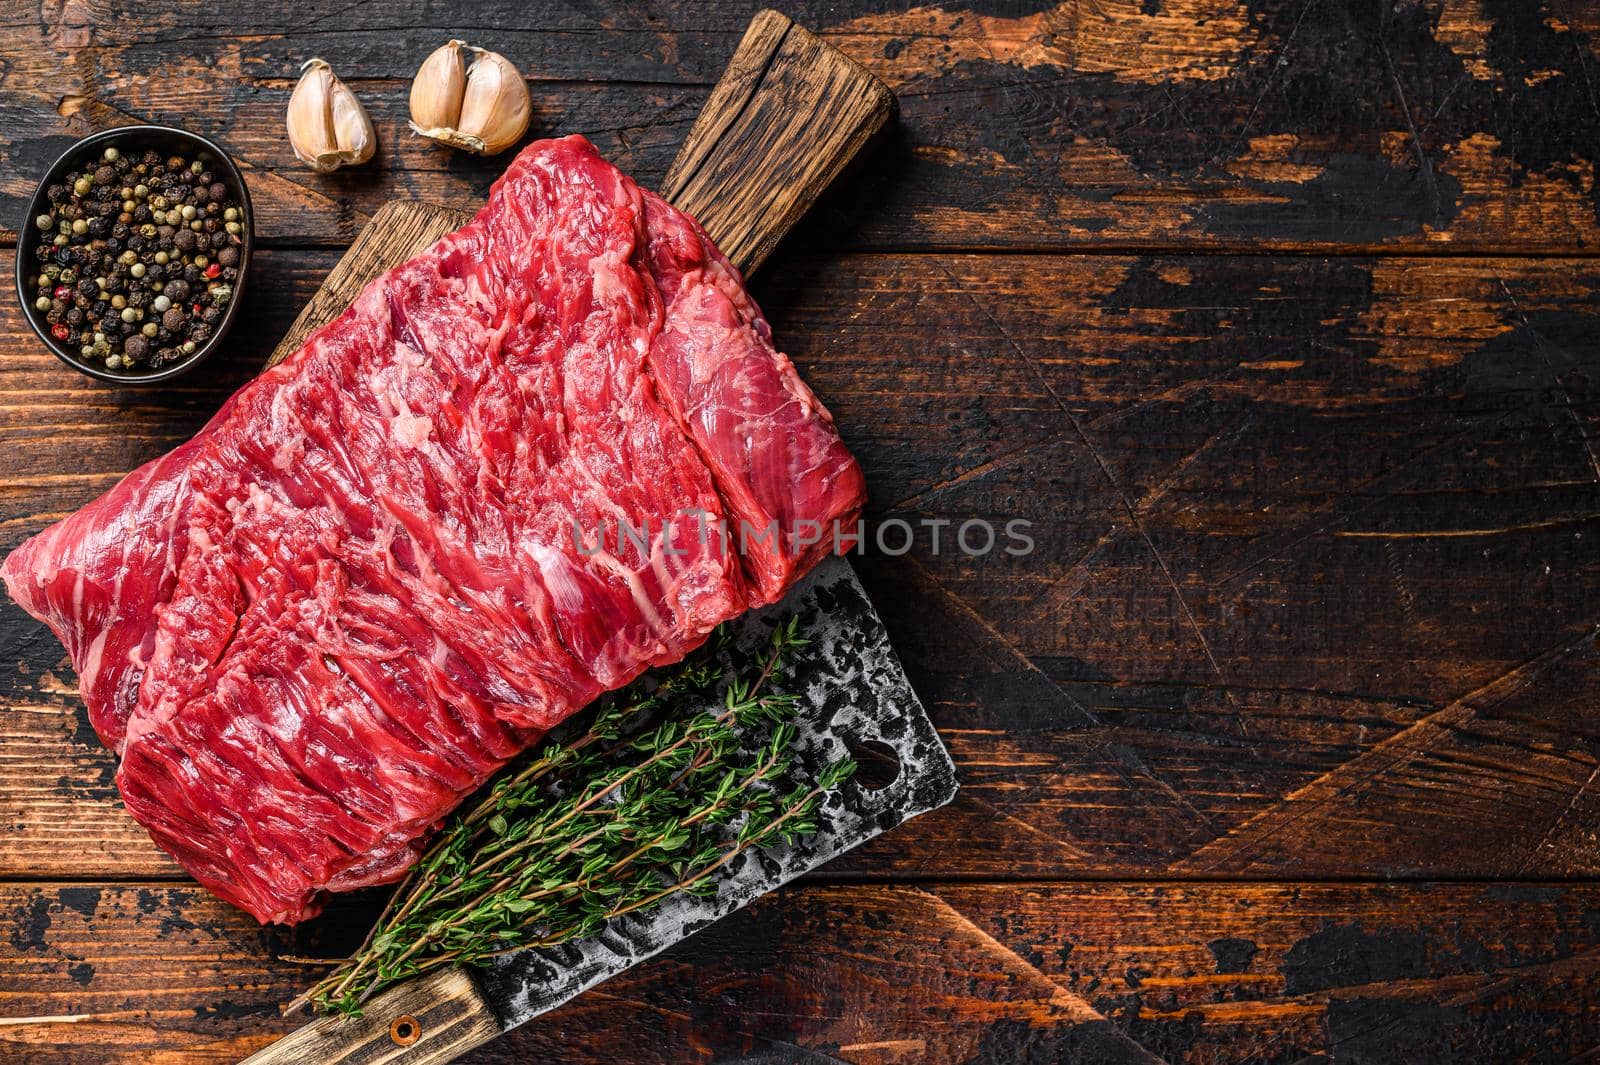 Big piece of raw beef brisket cut meat with herbs and butcher cleaver. Dark wooden background. Top view. Copy space by Composter